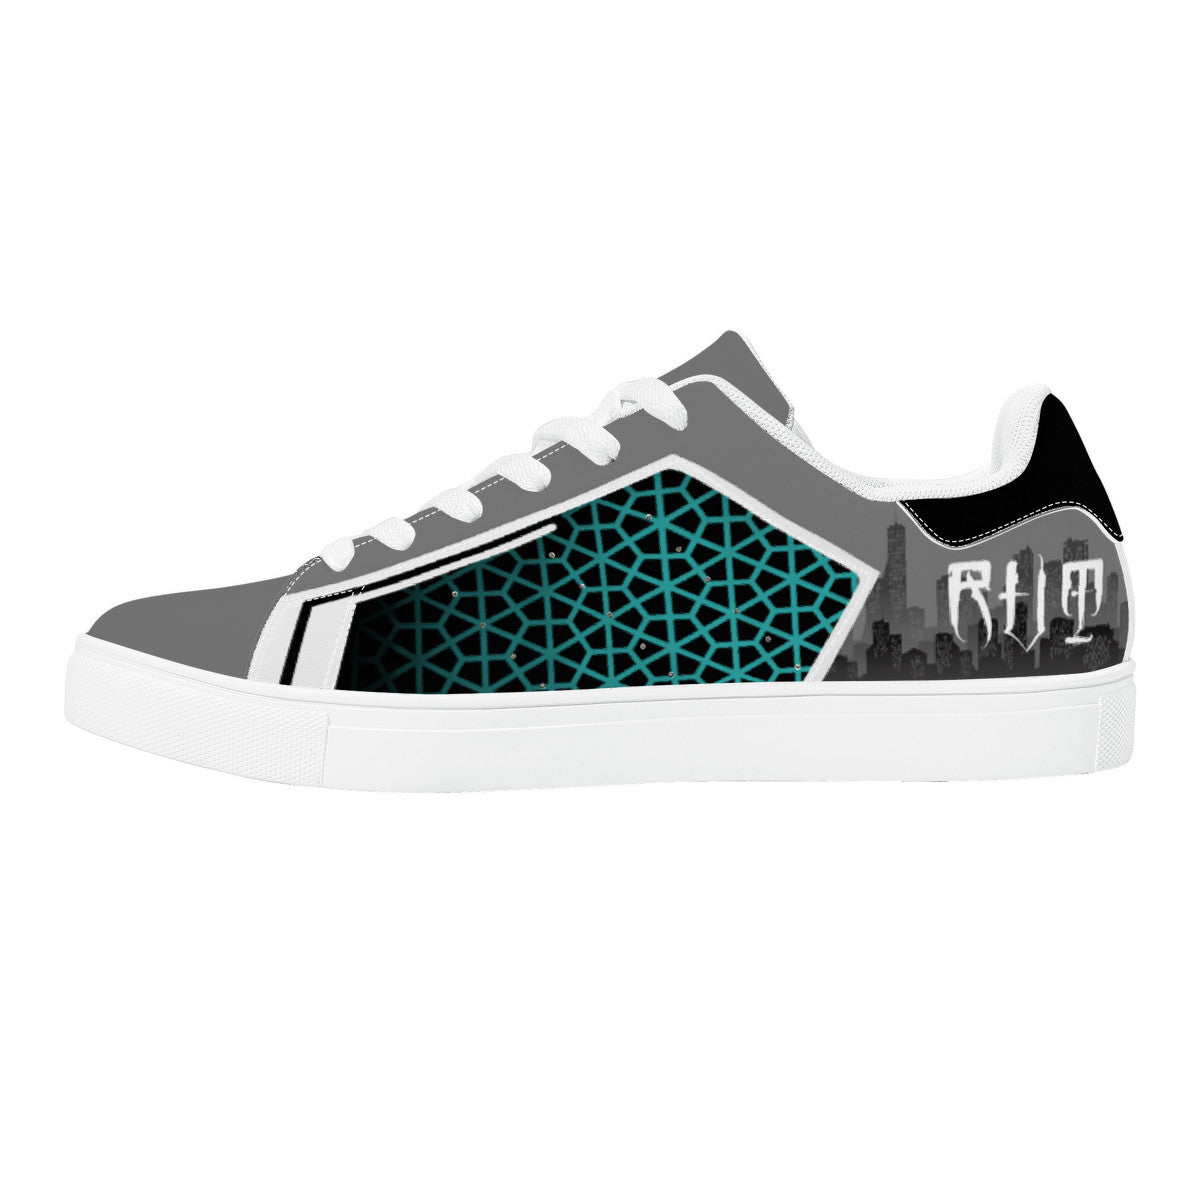 RVT Low-Top Synthetic Leather Sneakers - Skyline Blue Geometric